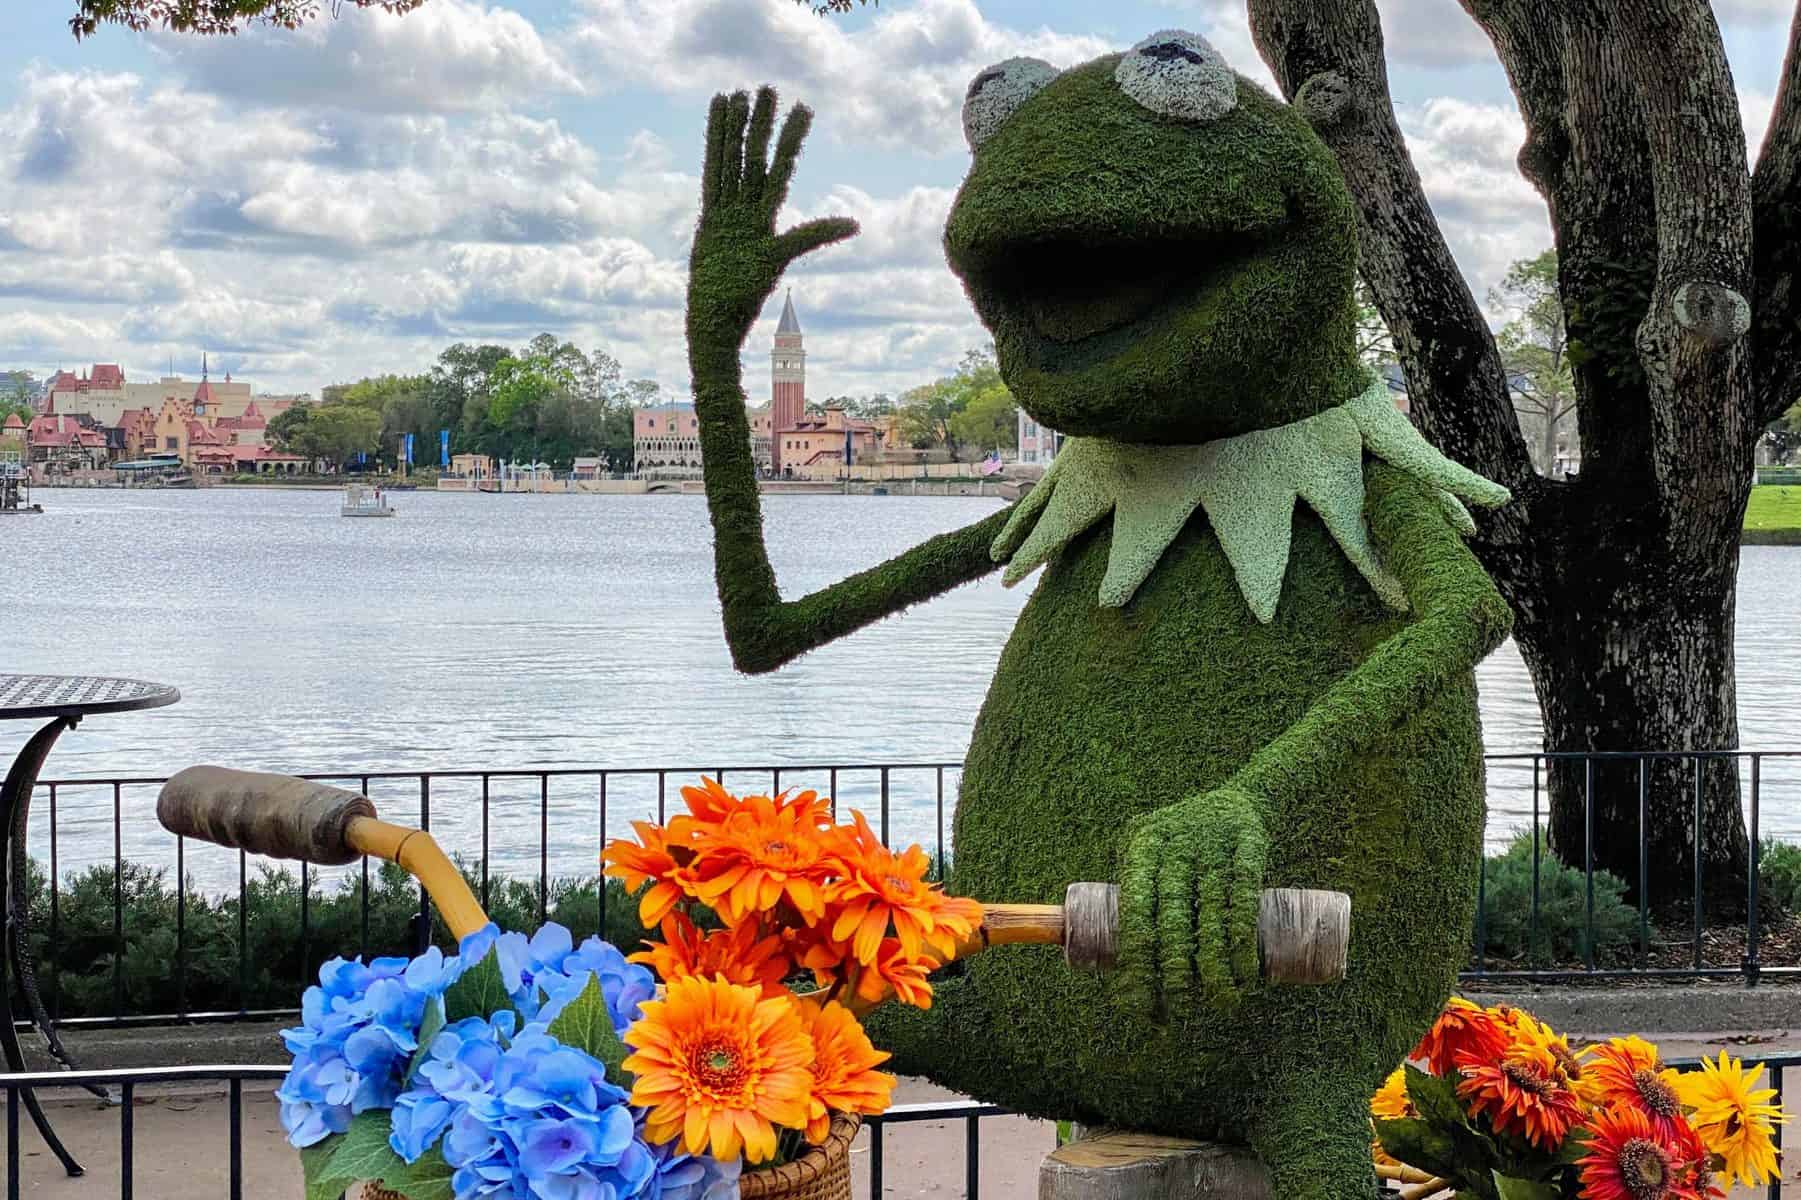 Our 5 favorite things at Epcot’s Flower and Garden Festival